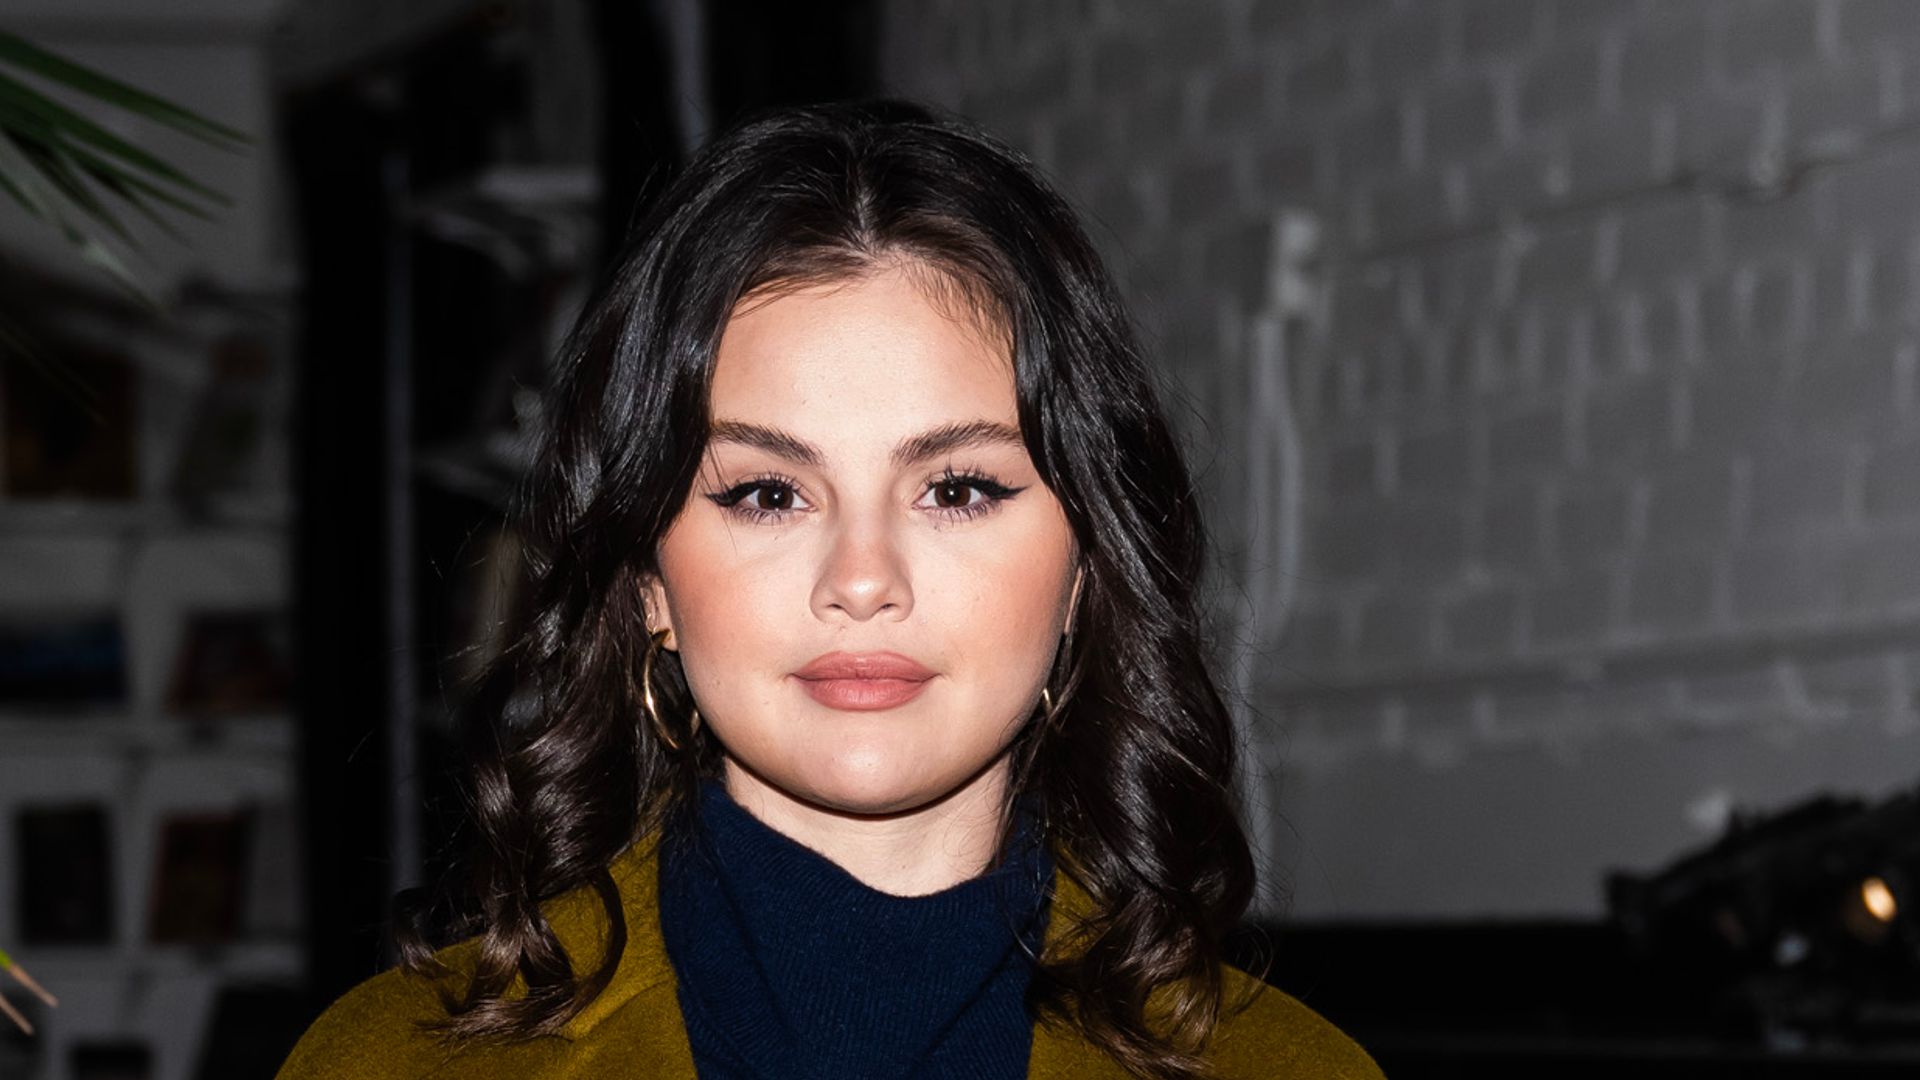 NEW YORK, NEW YORK - NOVEMBER 30: Selena Gomez attends the FYC screening and Q&A of the Apple Original Films âSelena Gomez: My Mind & Meâ at The Metrograph on November 30, 2022 in New York City. (Photo by Gotham/FilmMagic)